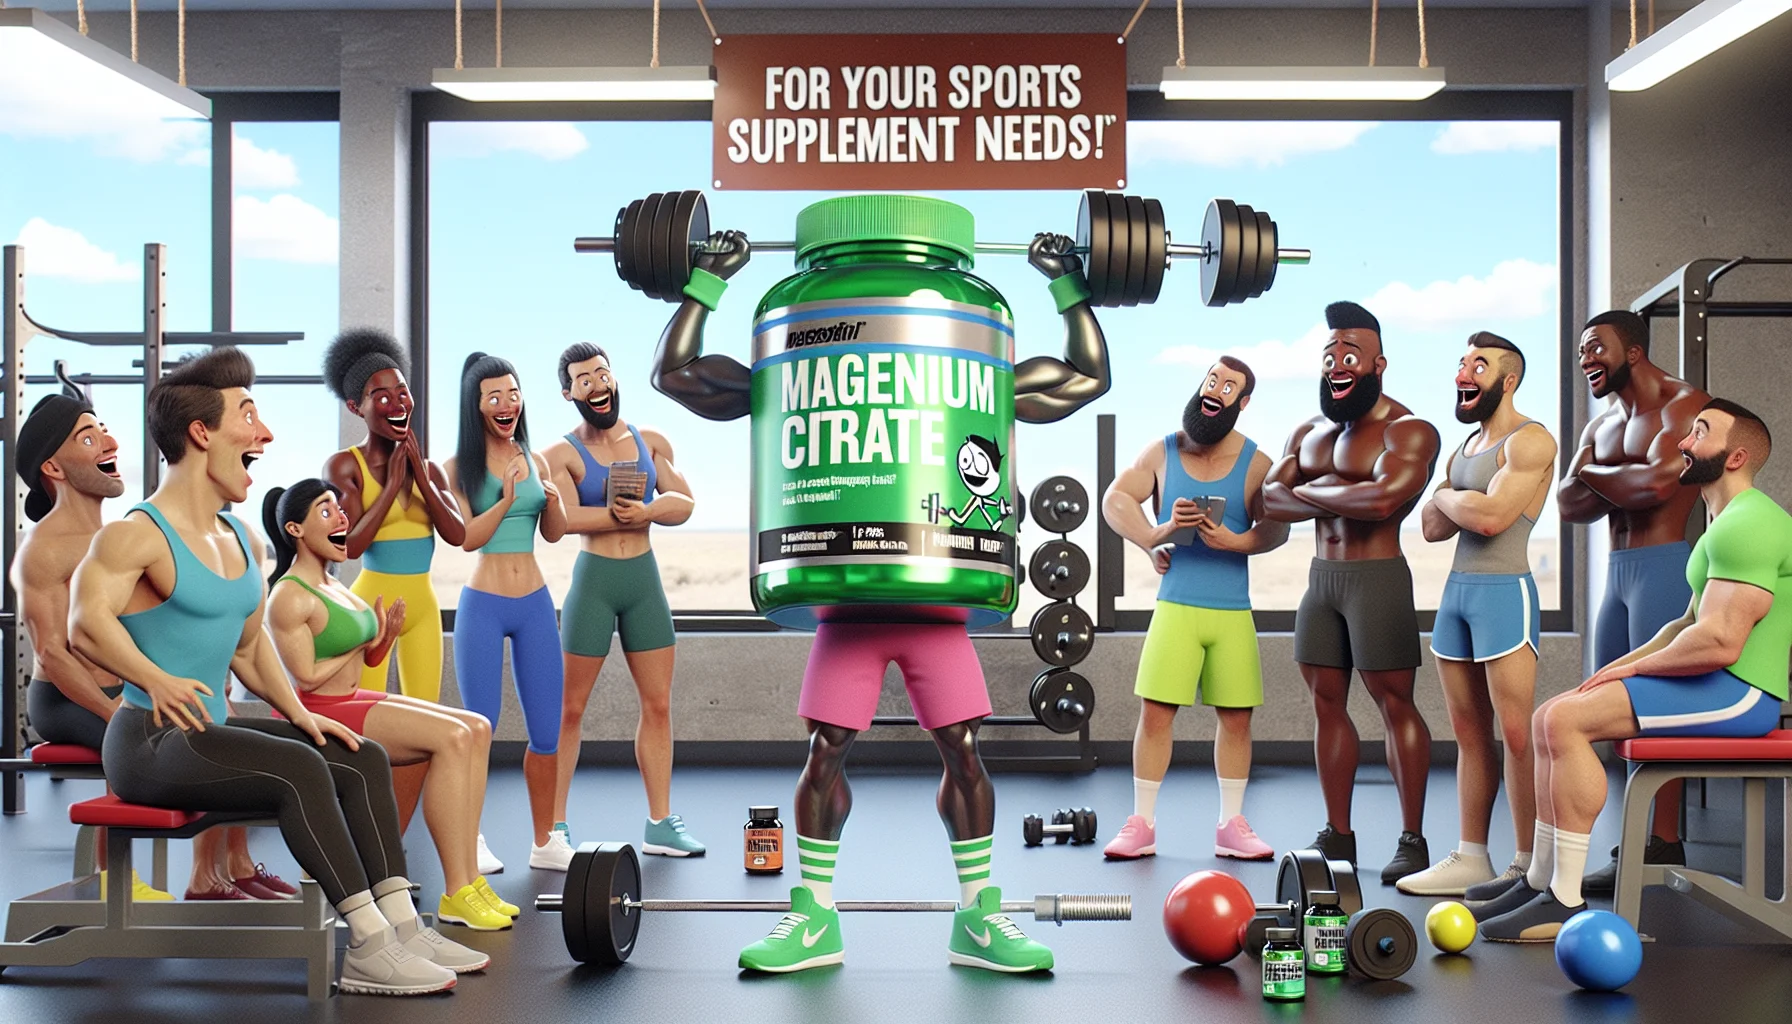 Imagine an engaging and humorous scene intended to pique interest in sports supplements. Picture a product labeled 'Magnesium Citrate' hilariously engaged in a gym setting. The bottle, personified, is in neon green workout clothes lifting barbells. Several other supplement bottles are observing, their labels express shock and admiration. Around, human gym-goers of different descents and genders–a Caucasian man, a Black woman, a Hispanic man and a Middle-Eastern woman–look on with smiles and laughter, inspired by the 'fit' Magnesium Citrate bottle. The background prominently displays a banner saying, 'For Your Sports Supplement Needs'.